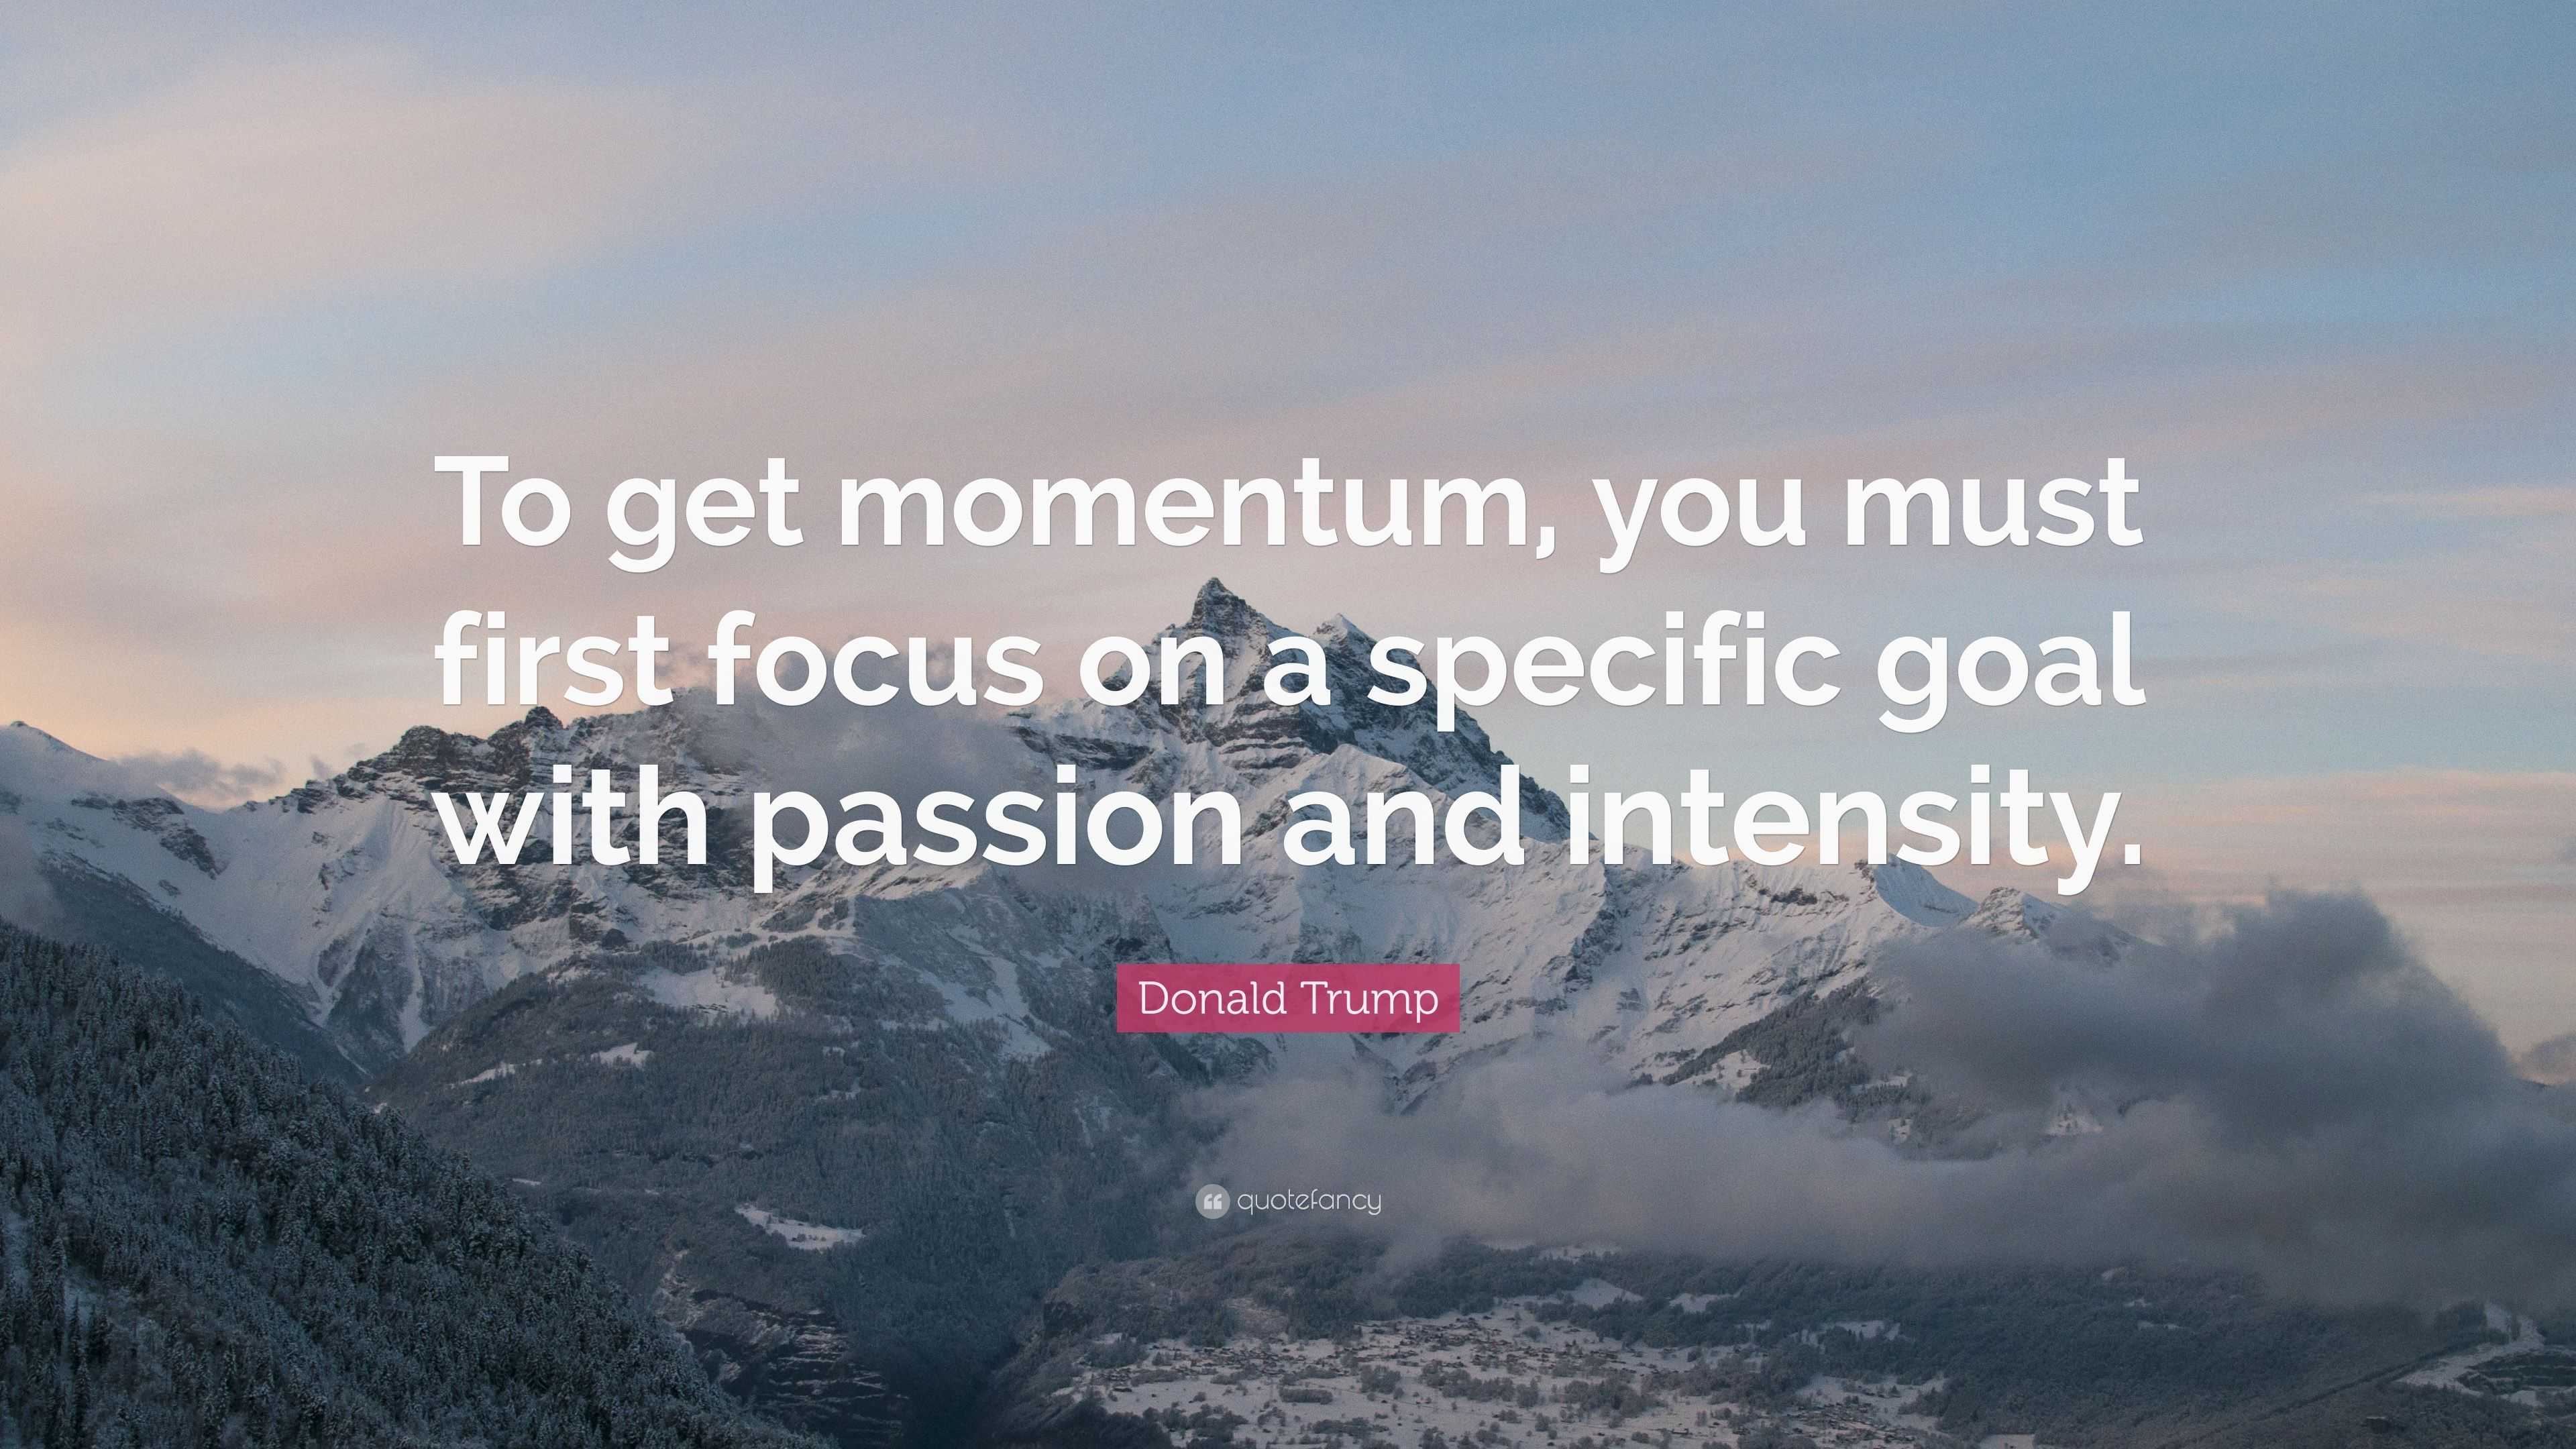 Donald Trump Quote: “To get momentum, you must first focus on a ...